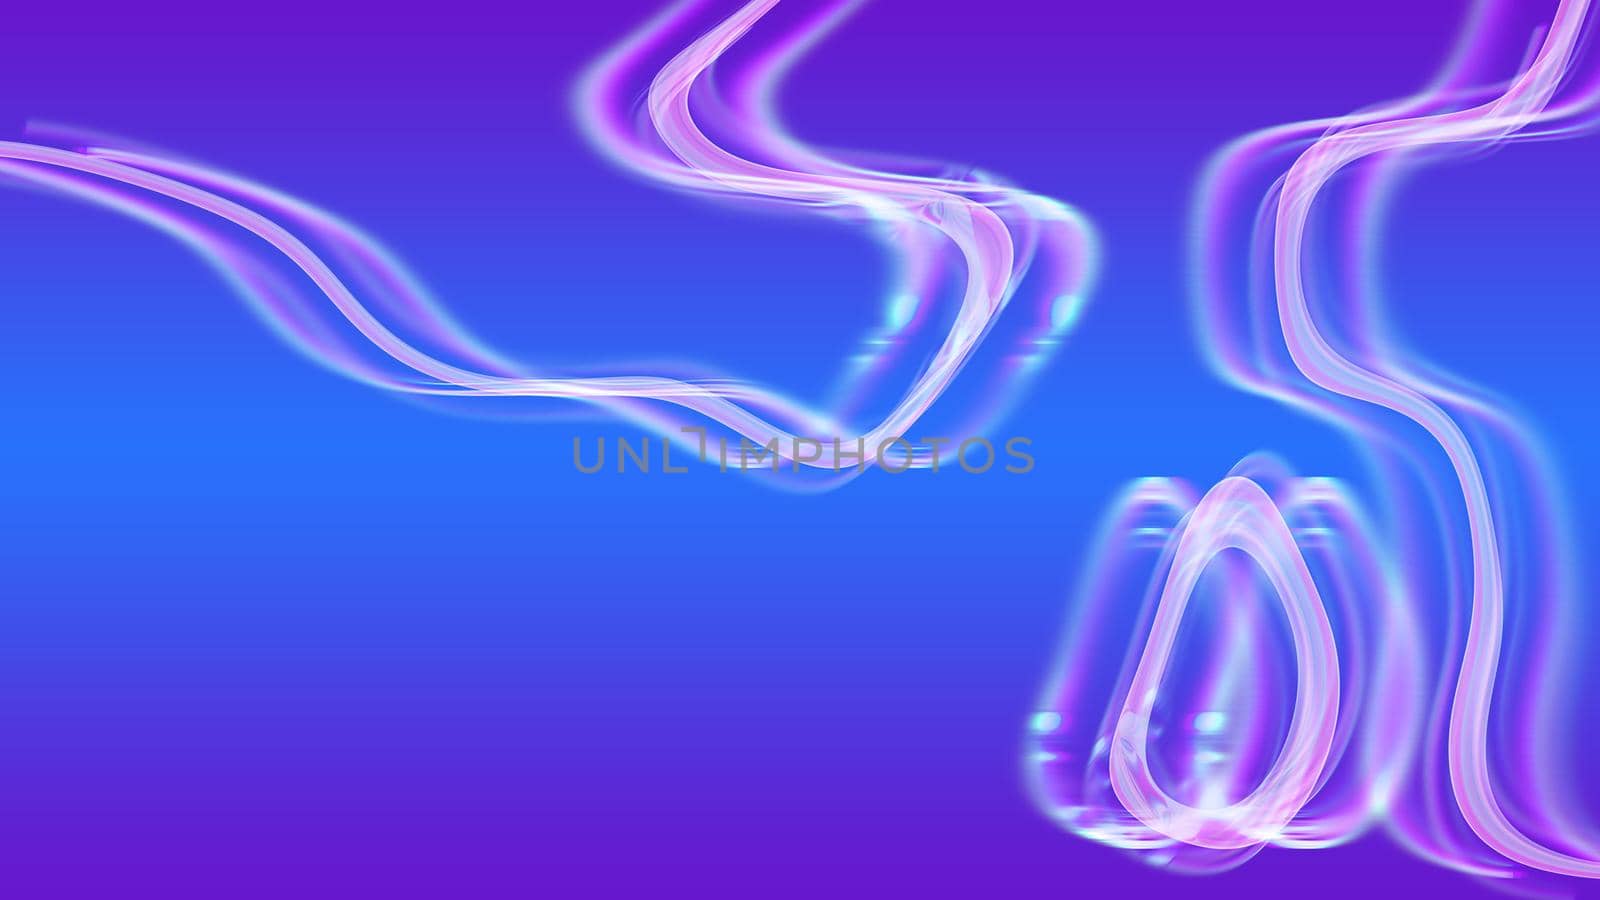 Abstract gradient background with a glowing figure.